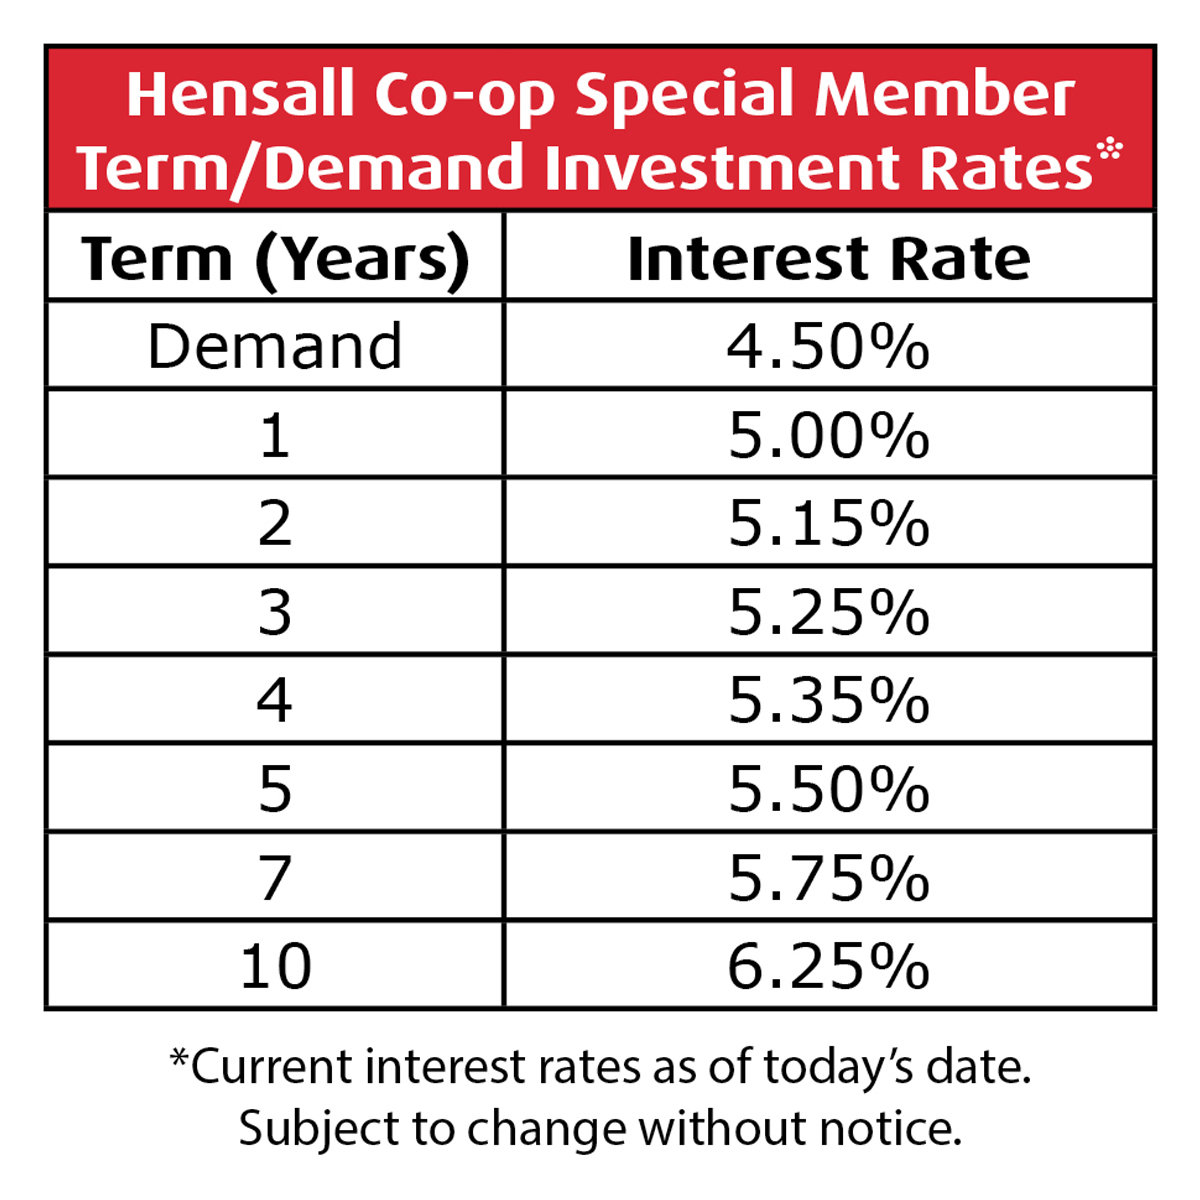 Investment rates at Hensall Co-op